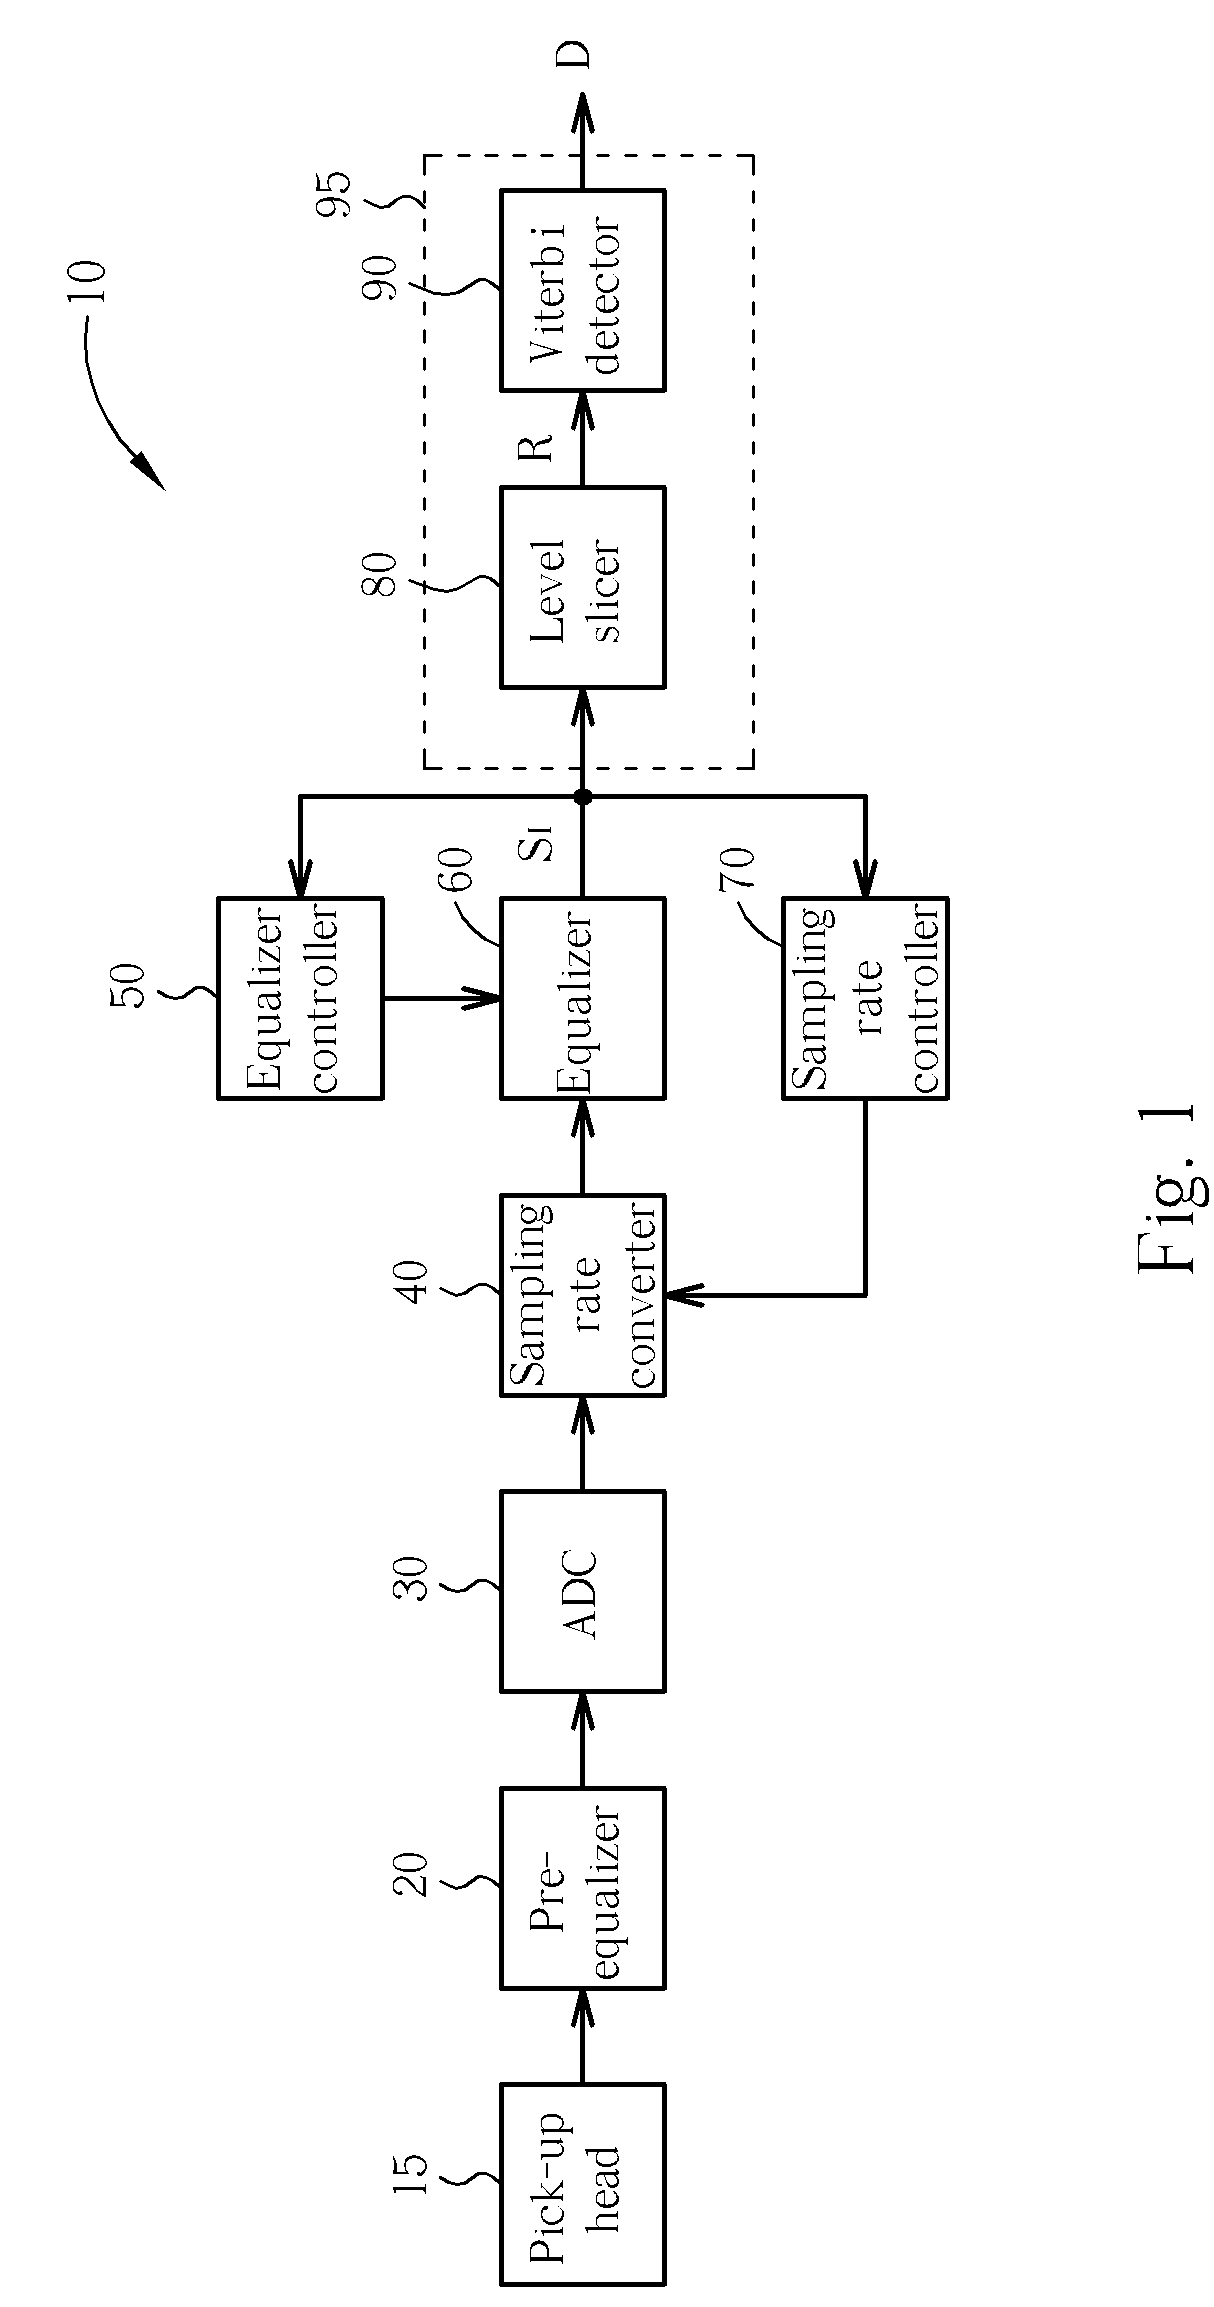 Decoding apparatus and method utilized in an optical storage device